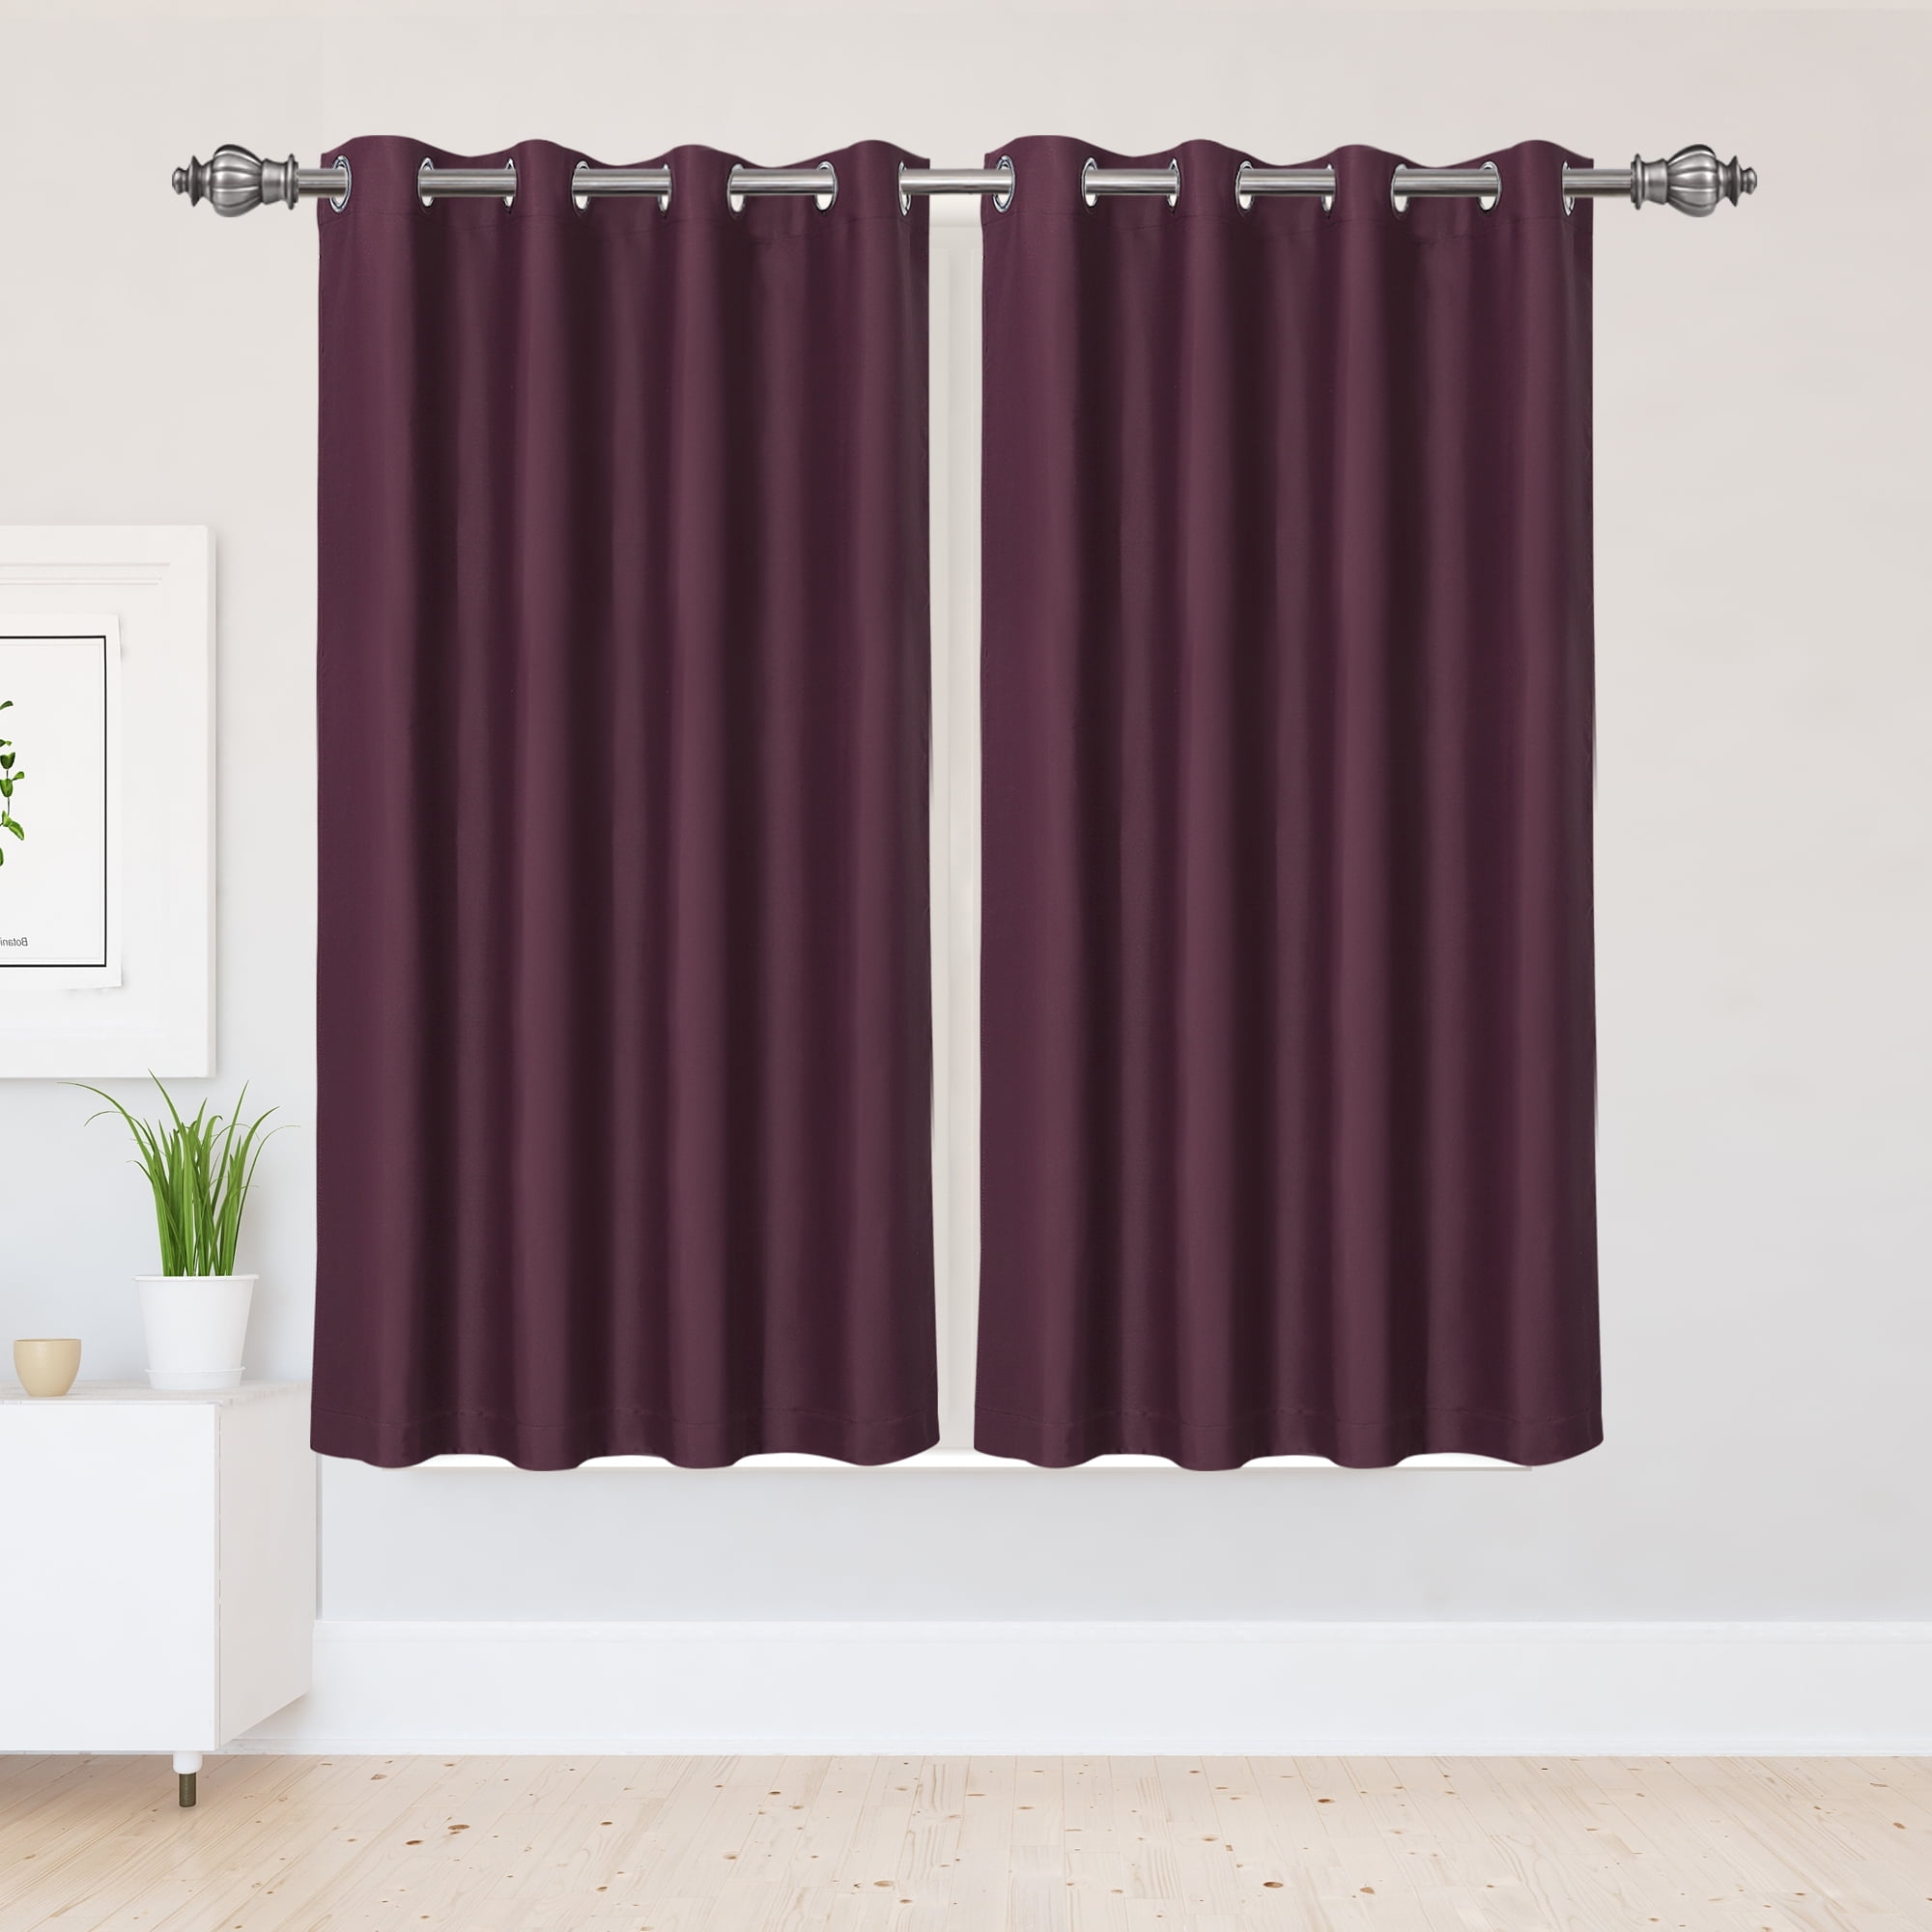 Details about   My Hero Academia Blackout Curtain 2PCS Living Room Curtain Window Drapes Decor 